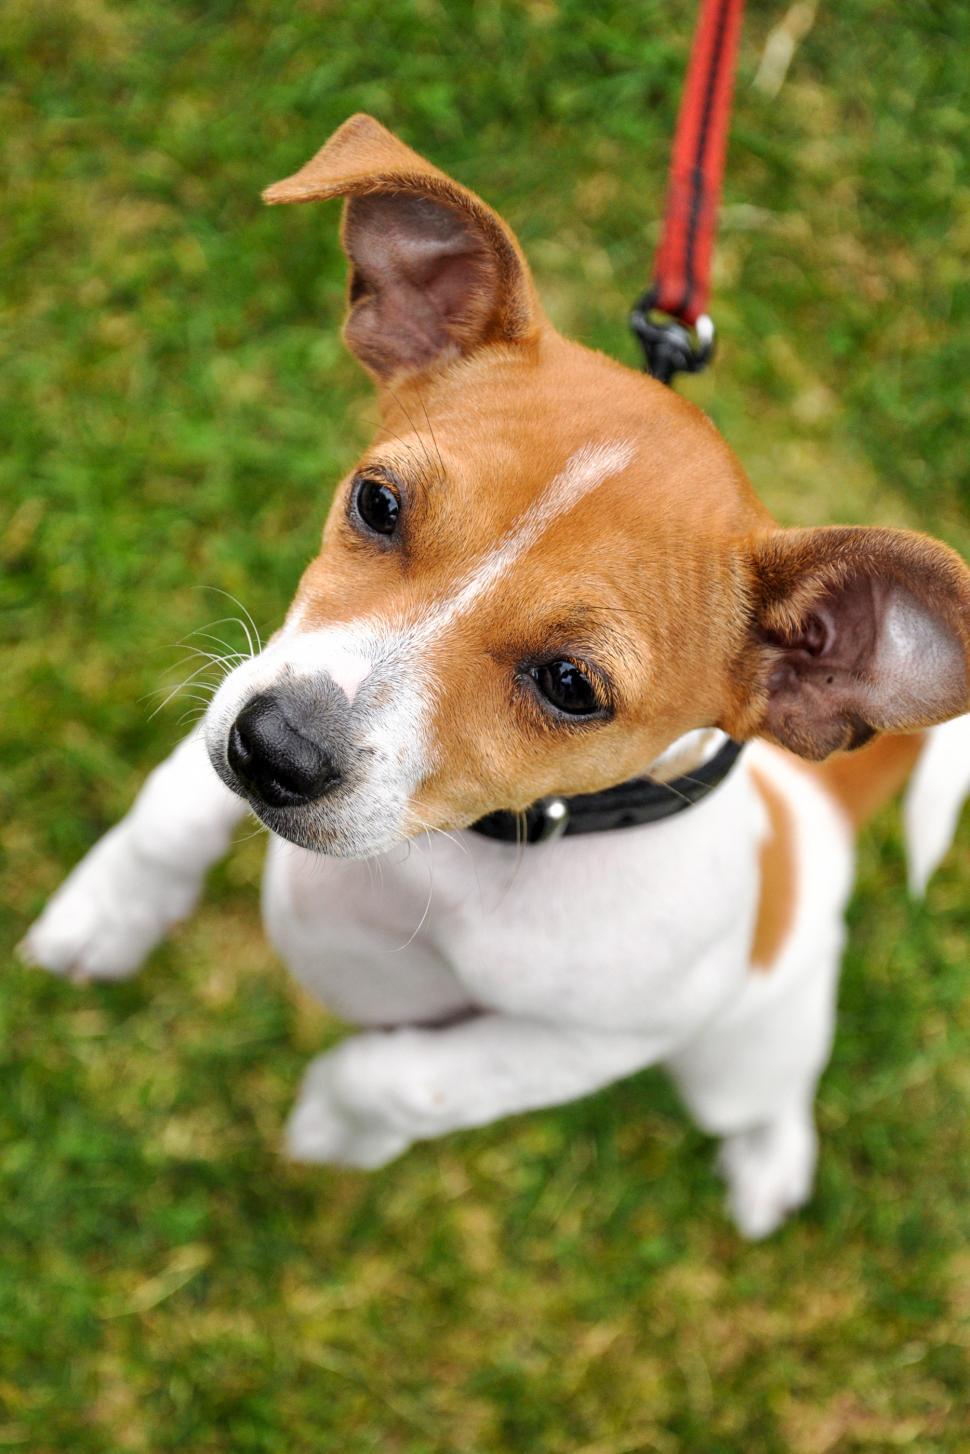 Free Image of Jack russel puppy jumping 